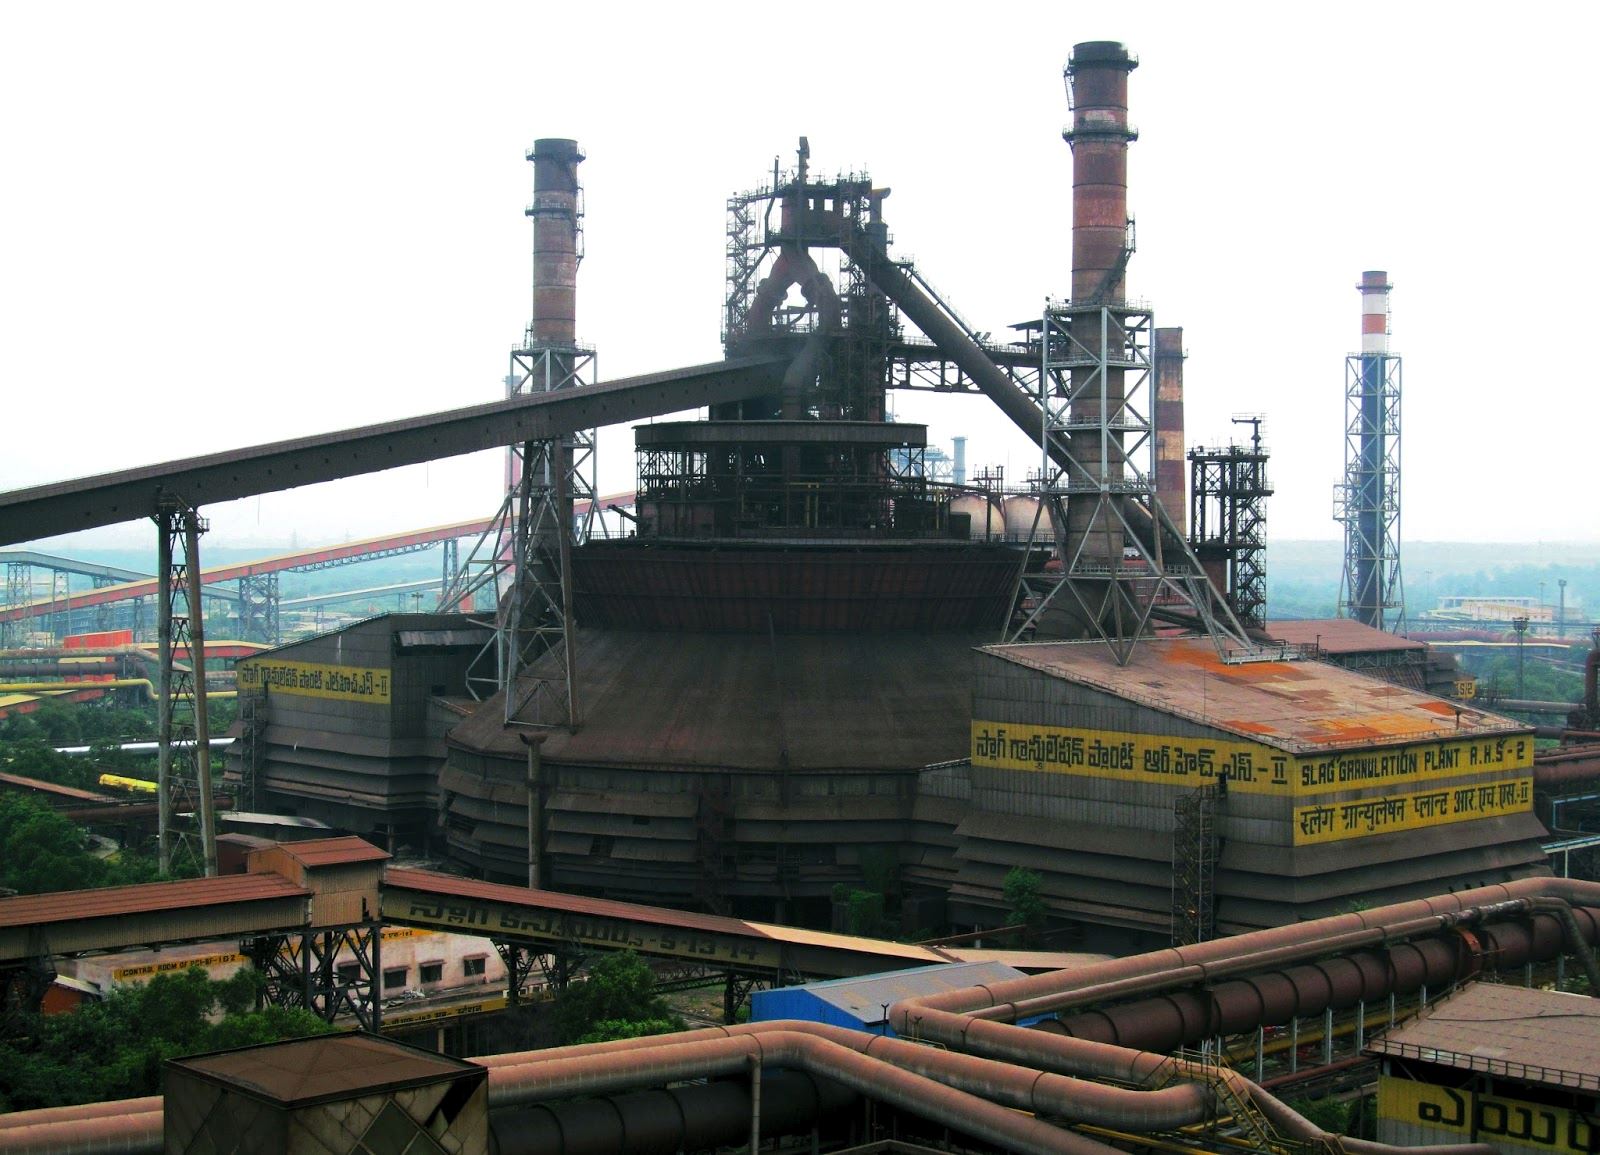 India's state-owned steel company RINL in the process of renewing its fund